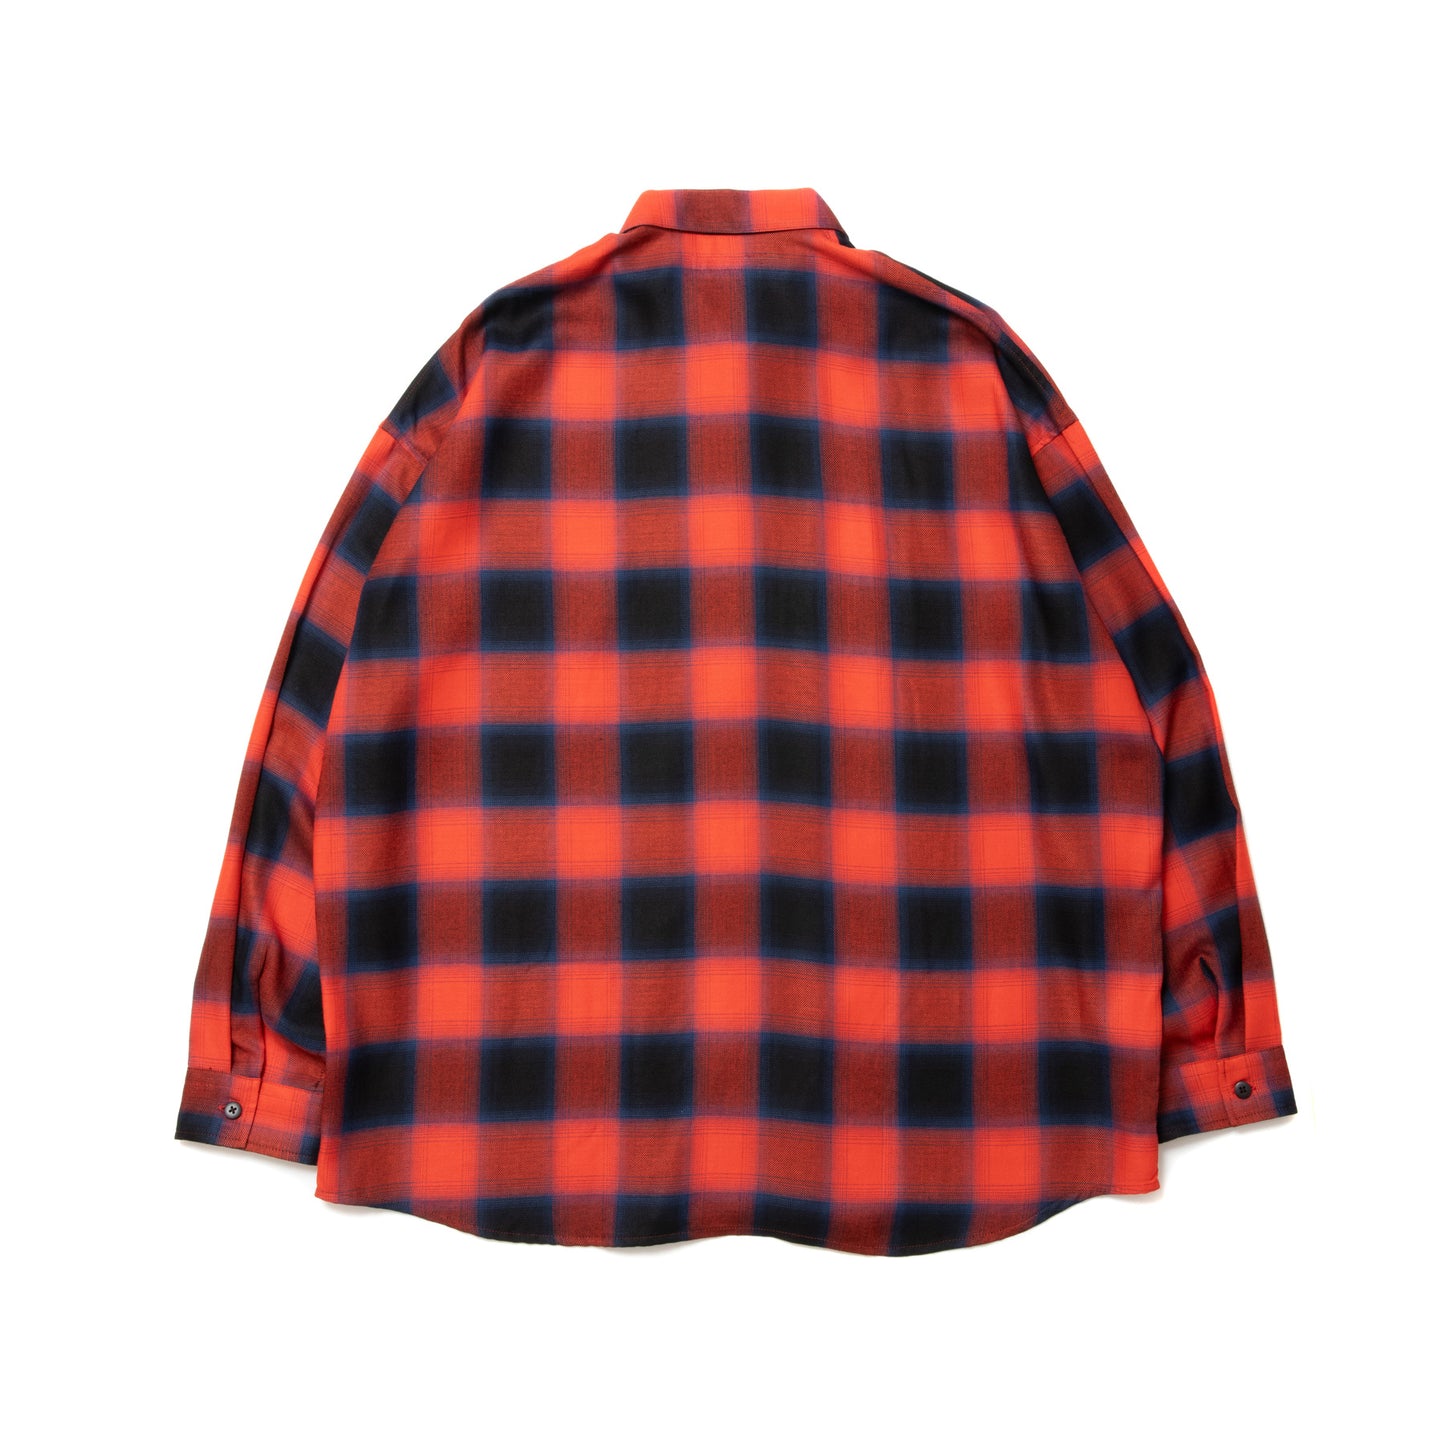 ROTTWEILER ロットワイラー R9 OMBRE L/S SHIRTS RED